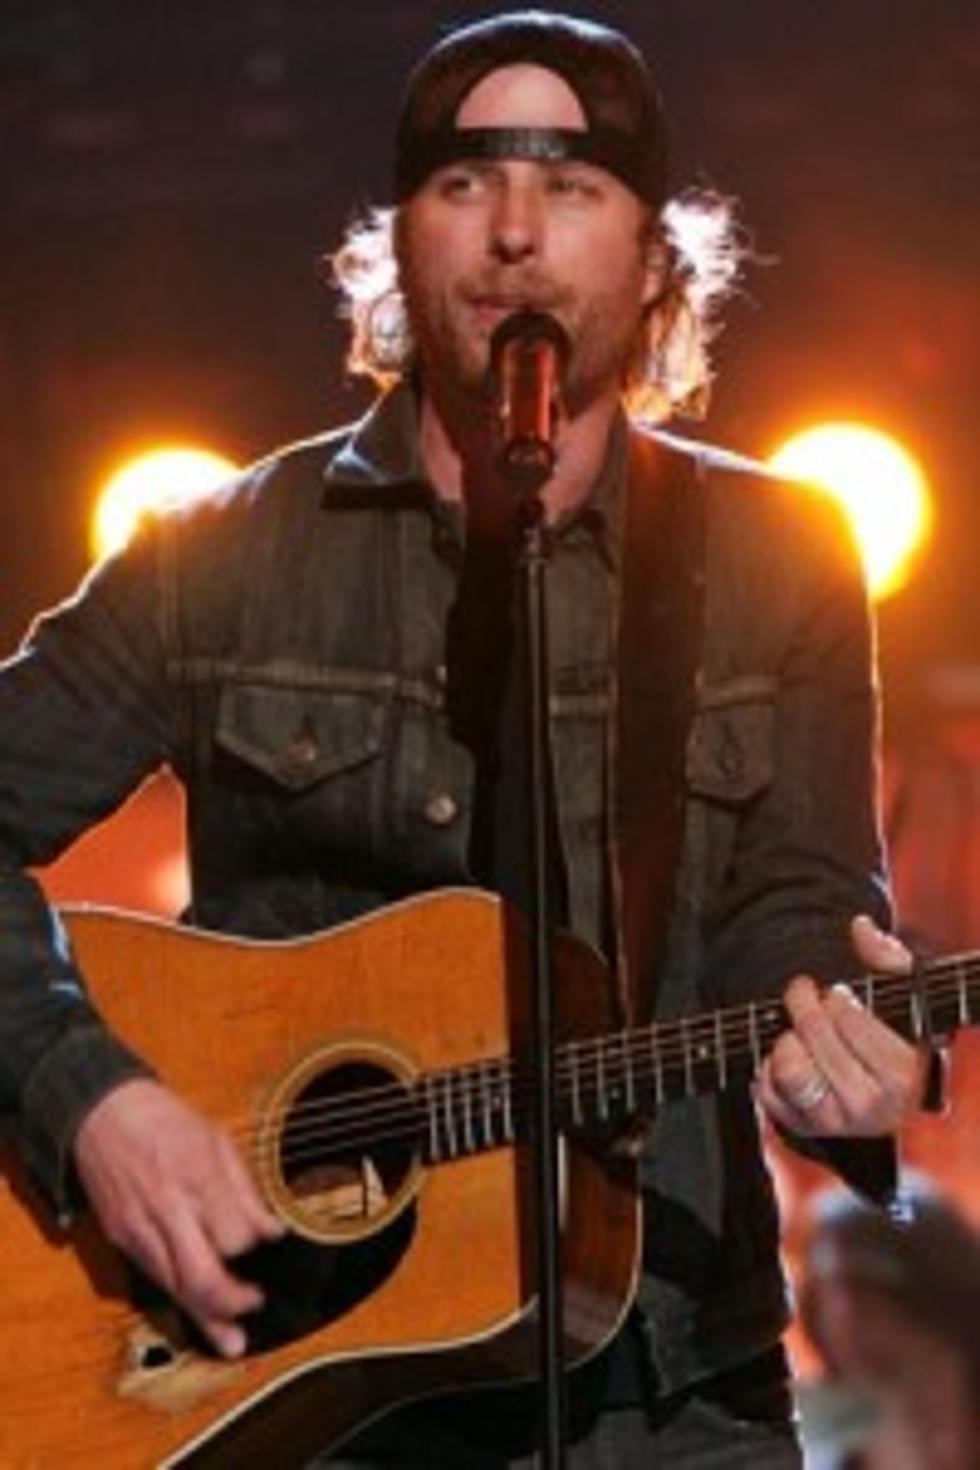 Be Friends With Dierks Bentley On Facebook or Twitter!